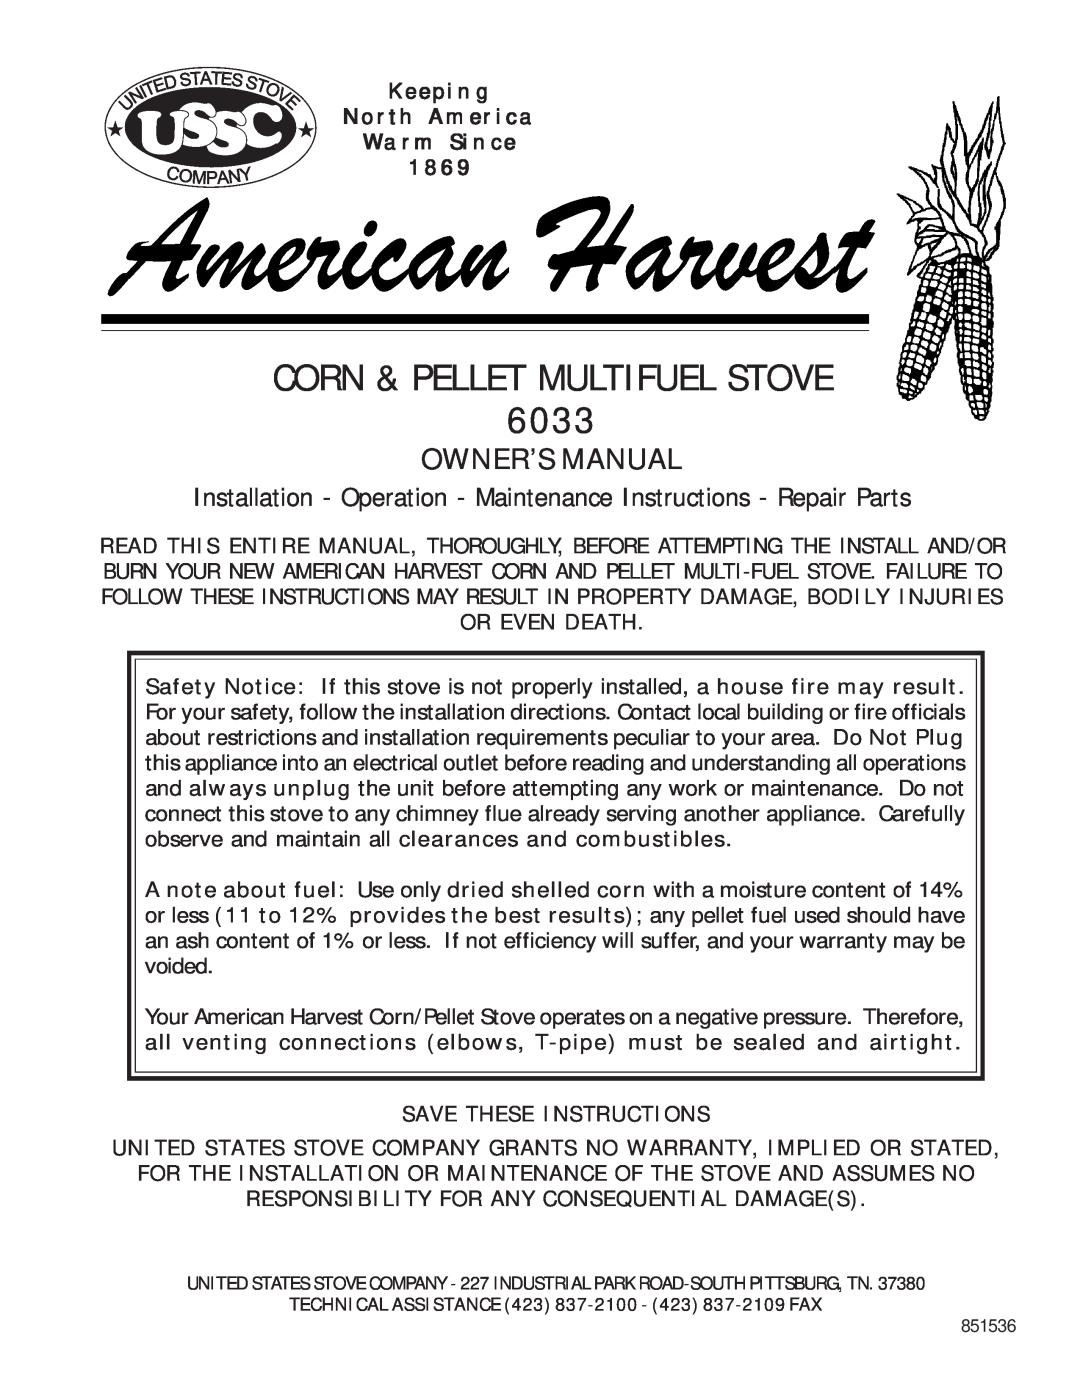 Nesco 6033 owner manual Corn & Pellet Multifuel Stove, Keeping North America Warm Since, Save These Instructions 